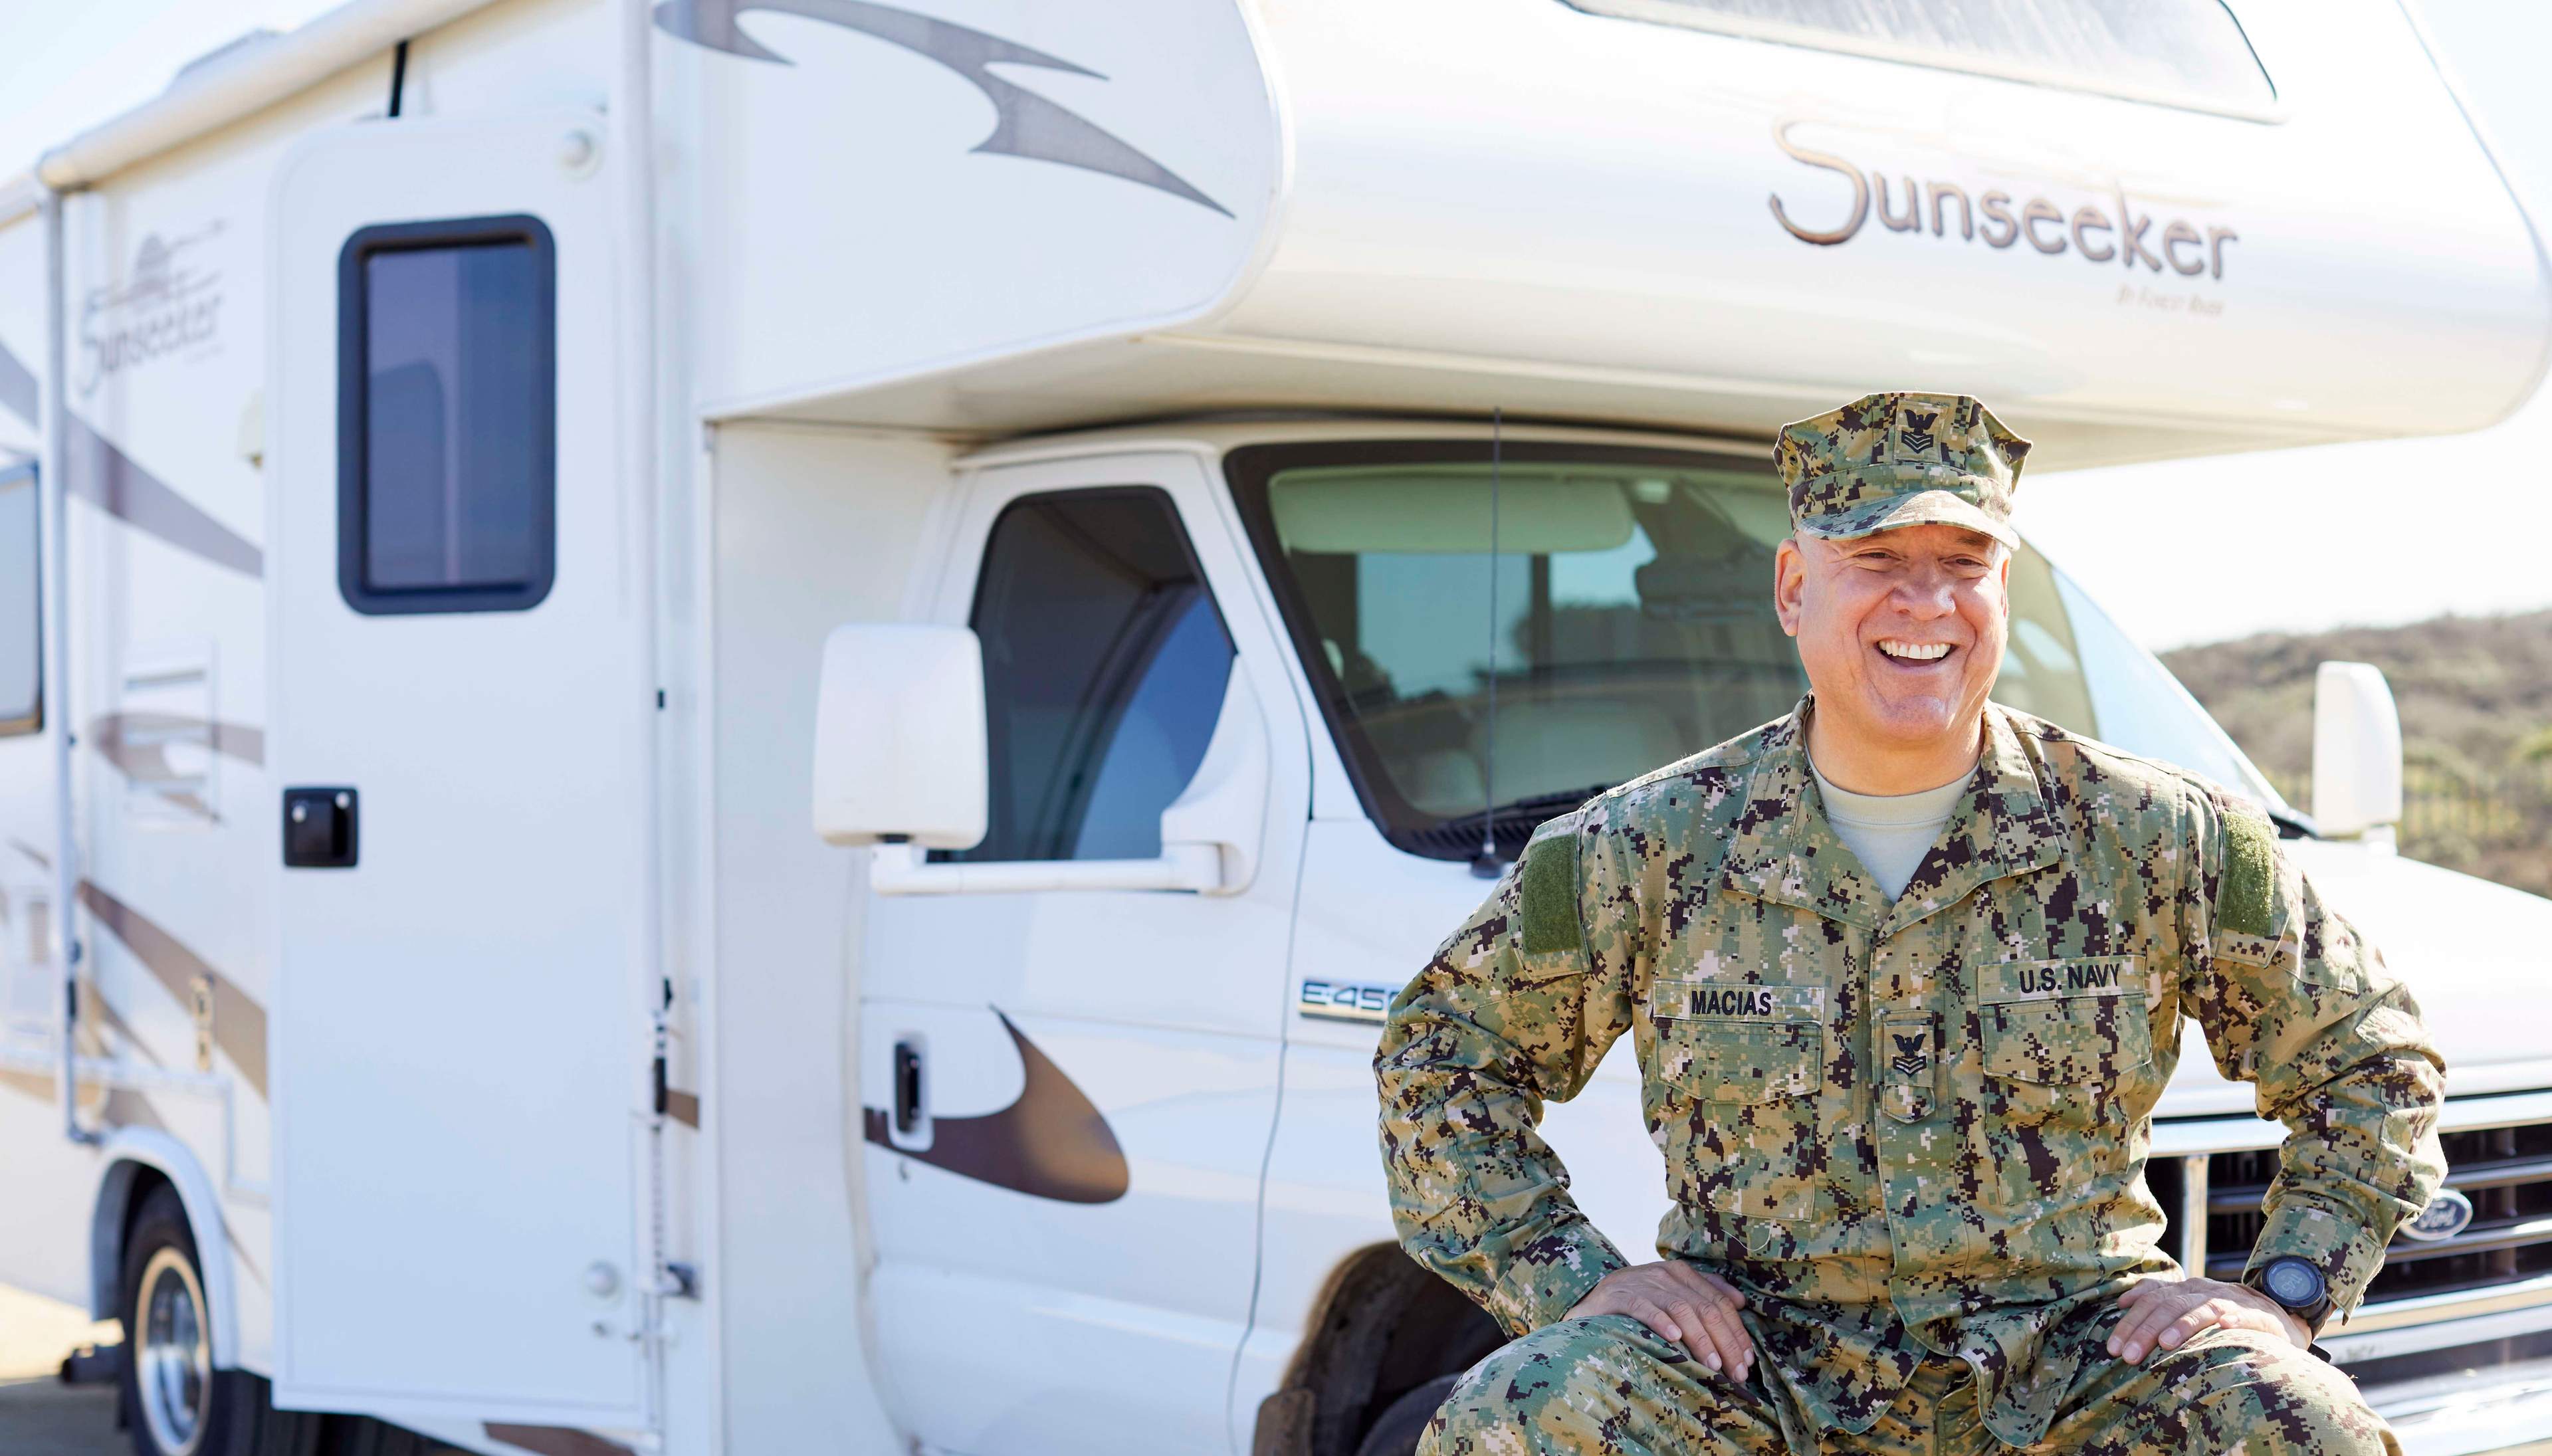 How One Veteran Found an Unexpected Entrepreneurial Career With His RV